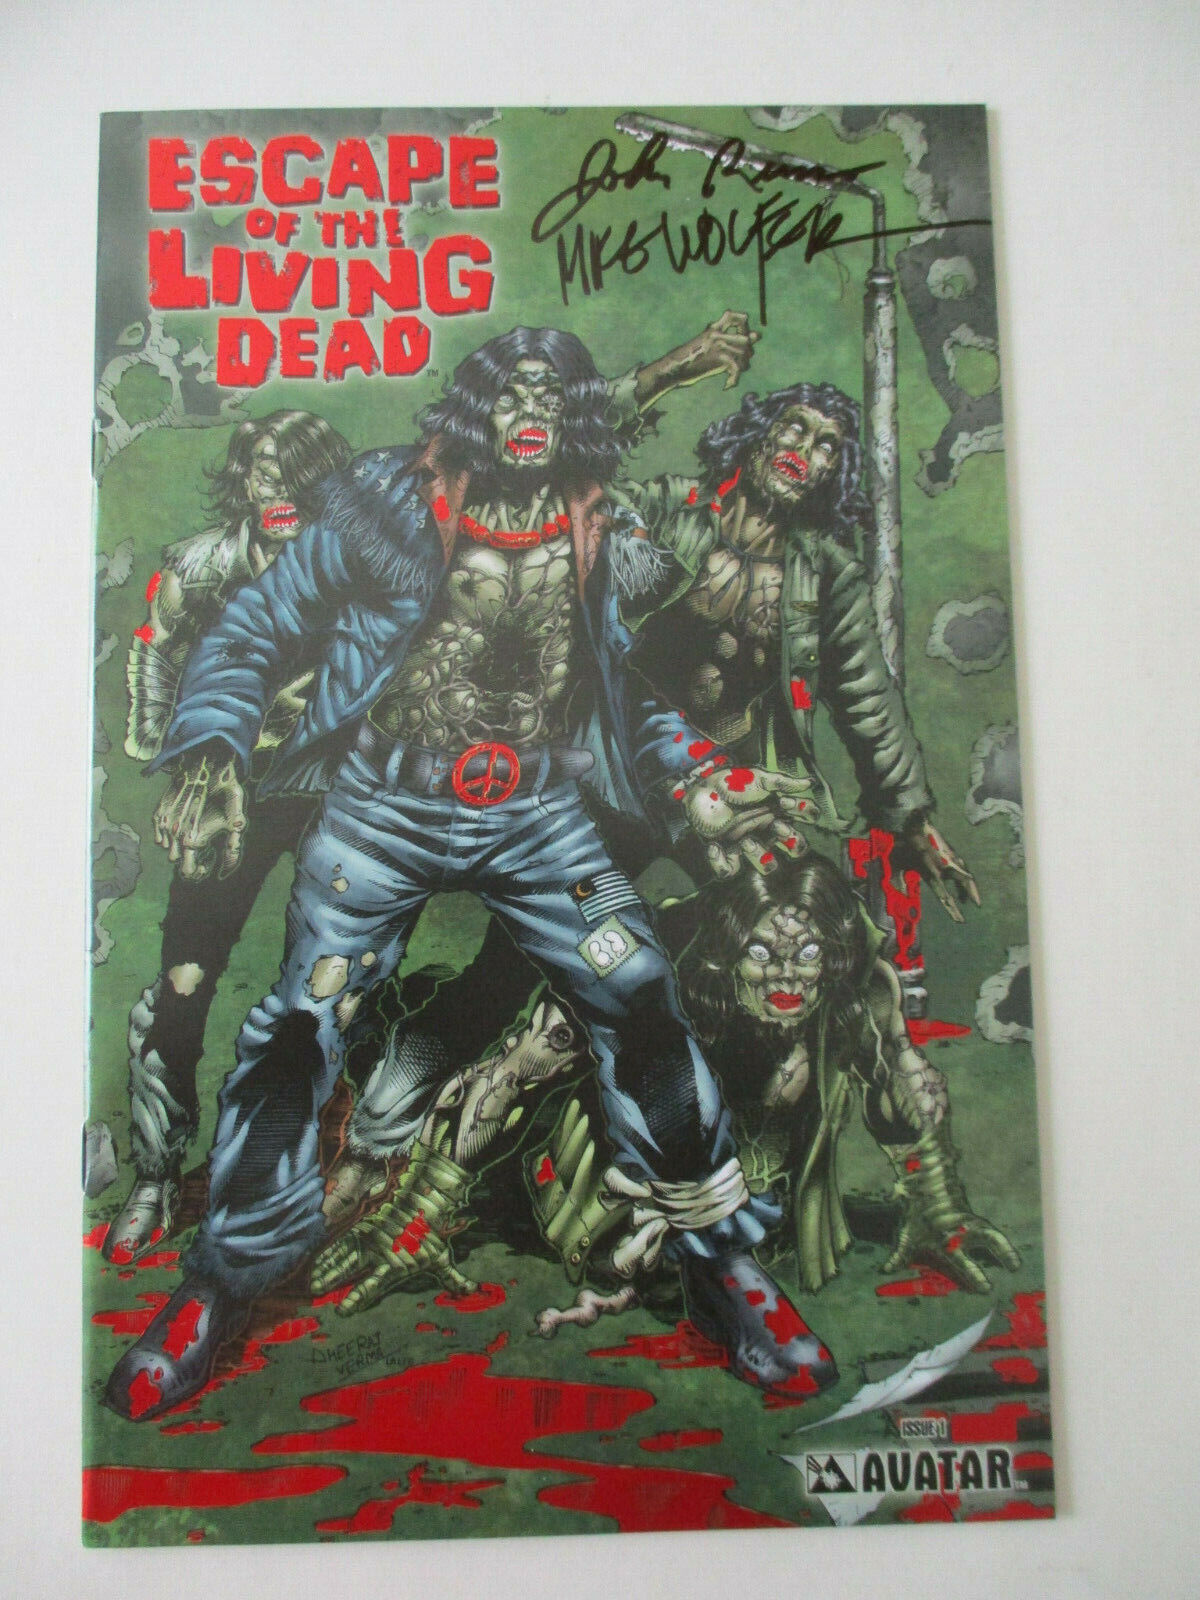 Escape of the Living Dead Red Foil Zombie Signed John Russo Mike Wolfer #1 COA